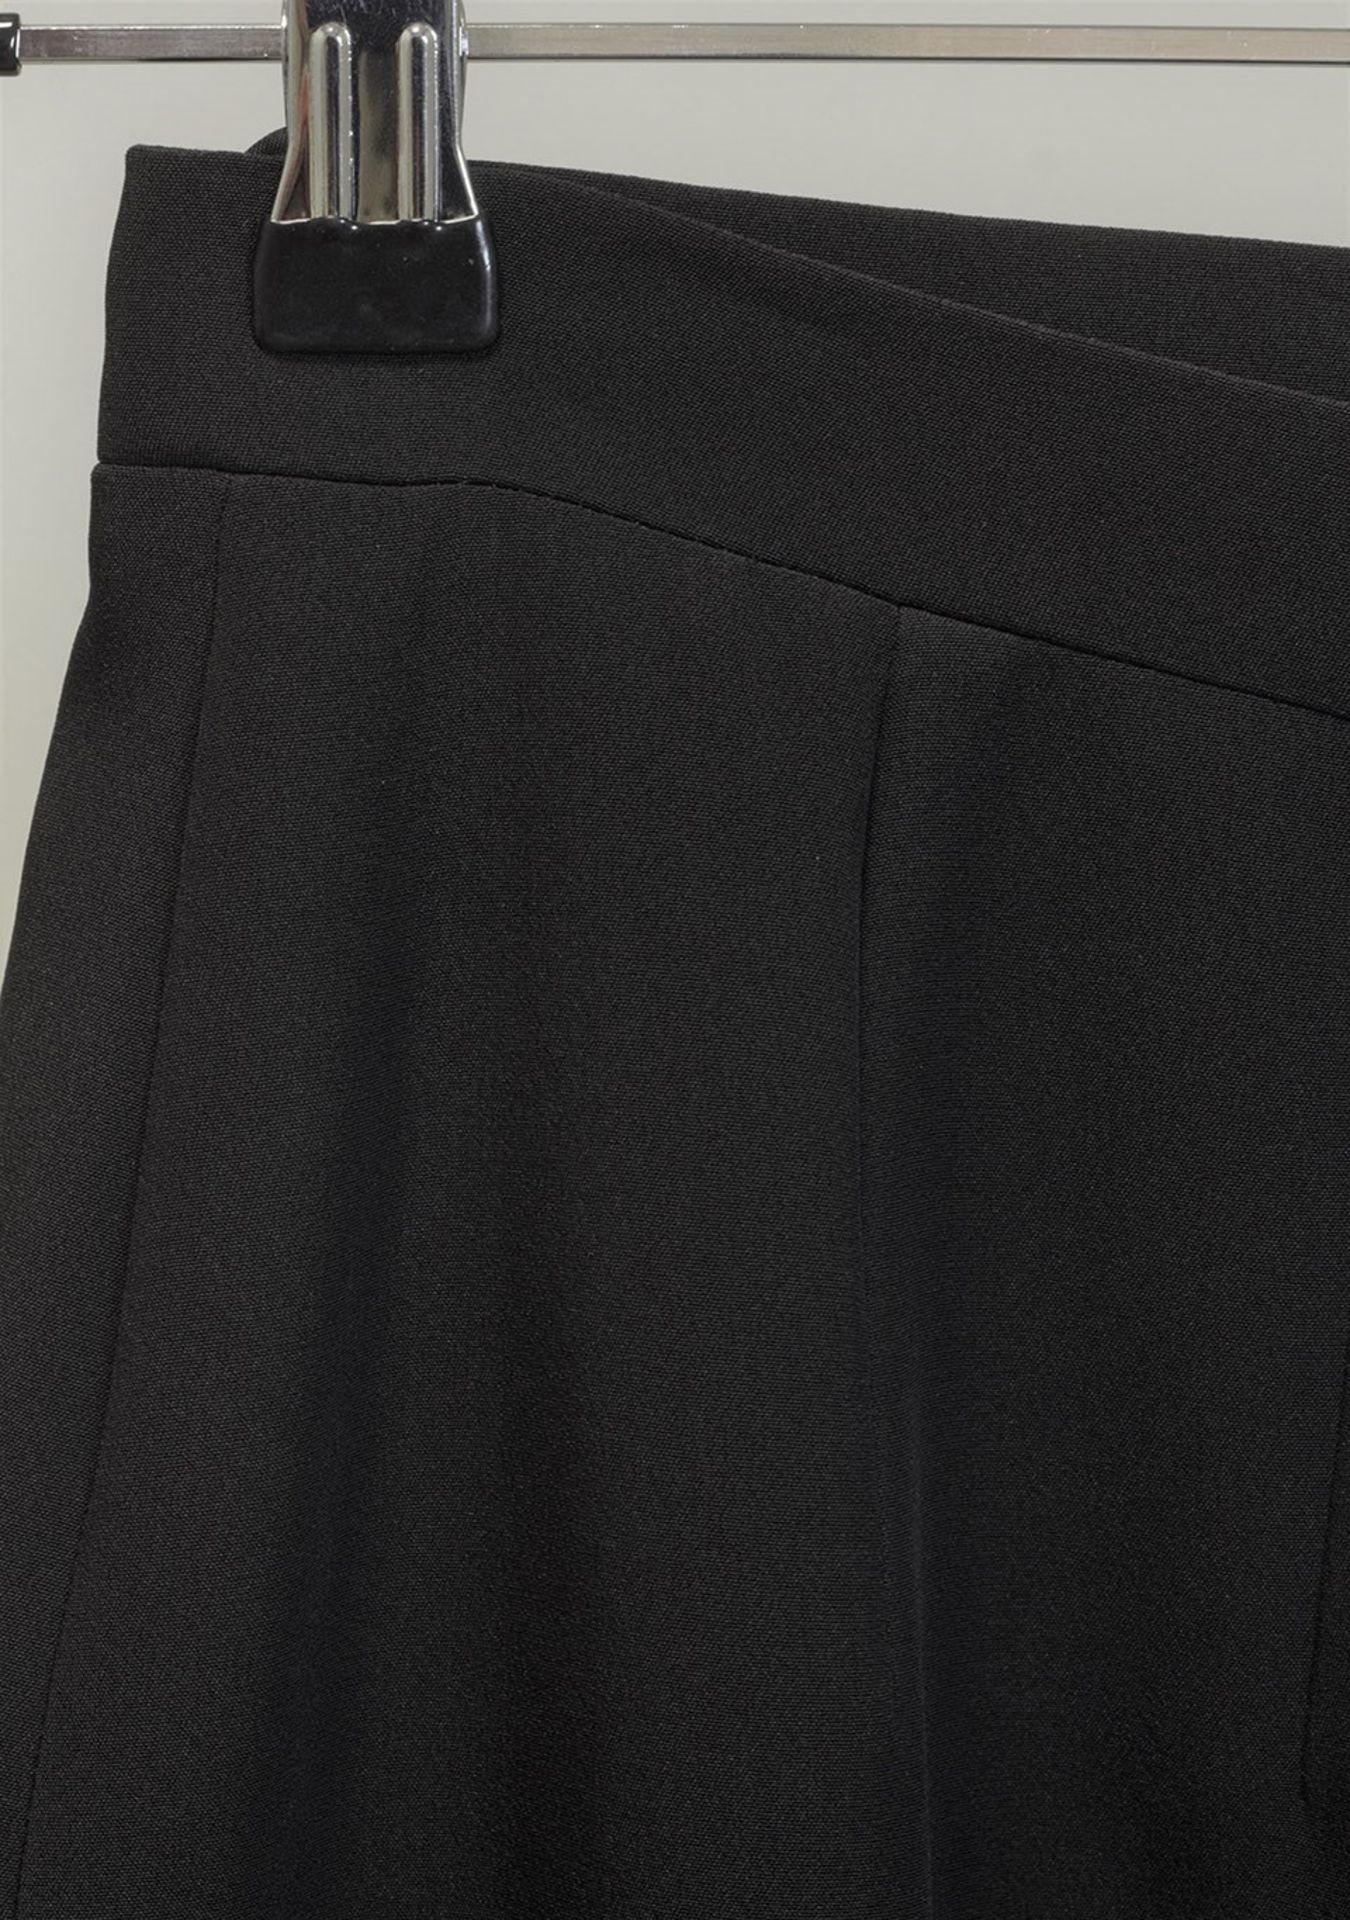 1 x Boutique Le Duc Black Skirt - From a High End Clothing Boutique In The Netherlands - - Image 4 of 7